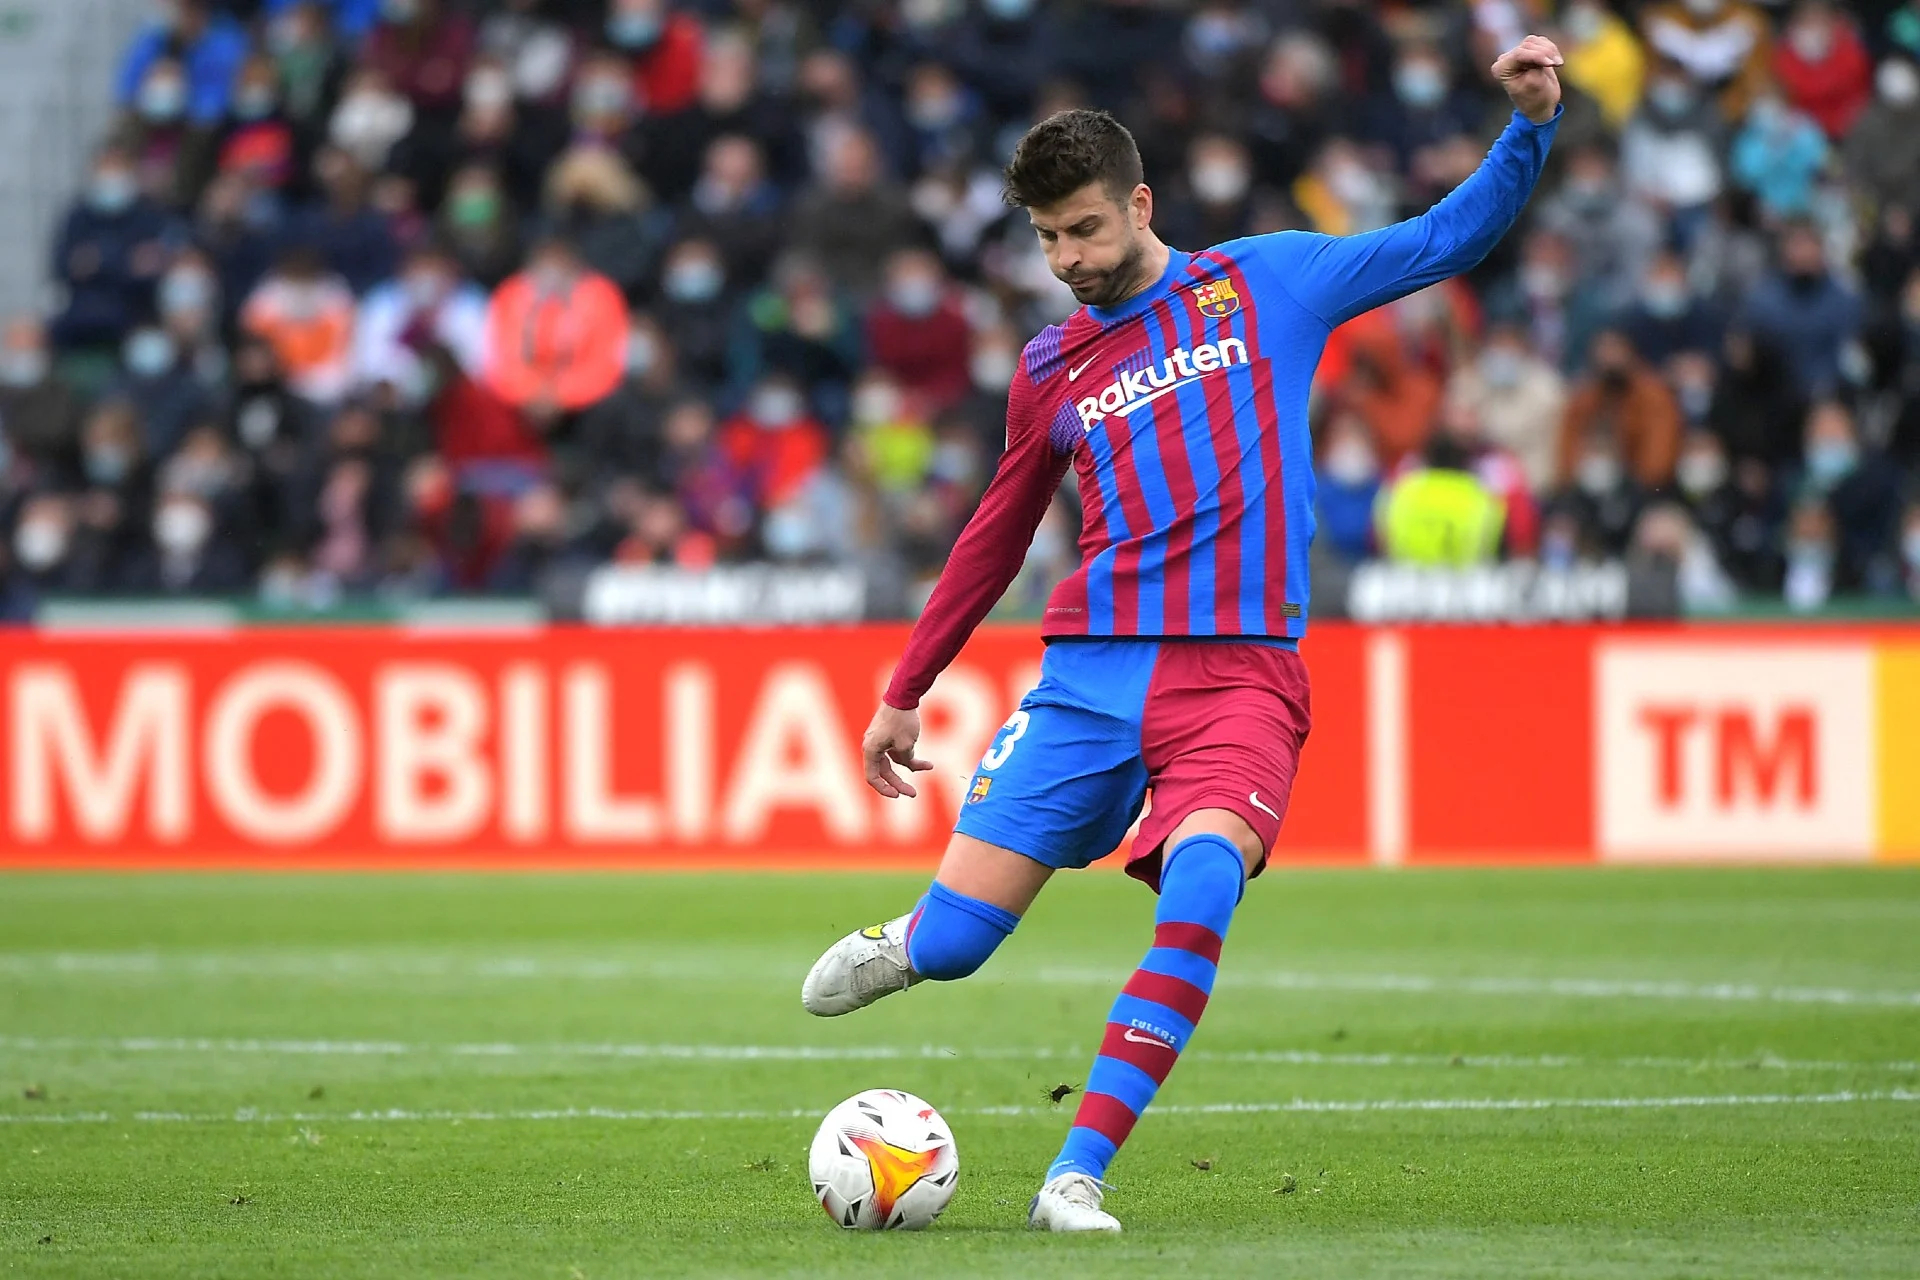 1920x1280 Barcelona star Gerard Pique profited from Saudi deal, according to leaked documents | Middle East Eye